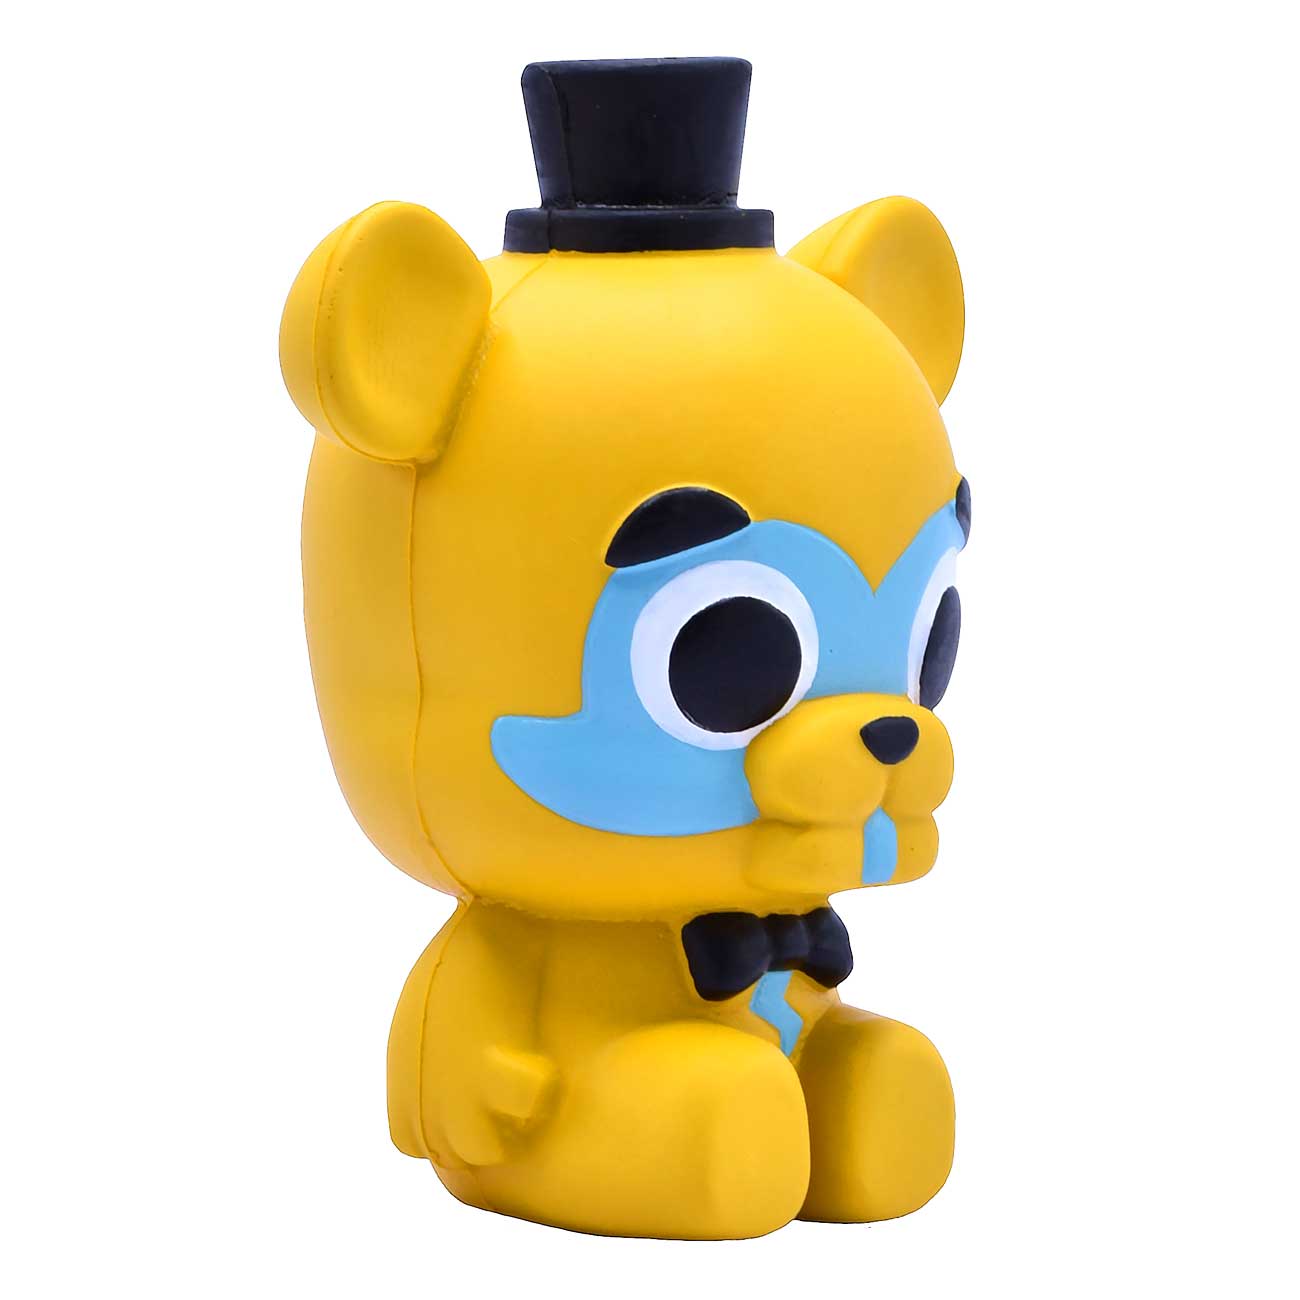  Just Toys LLC Five Nights at Freddy's Security Breach